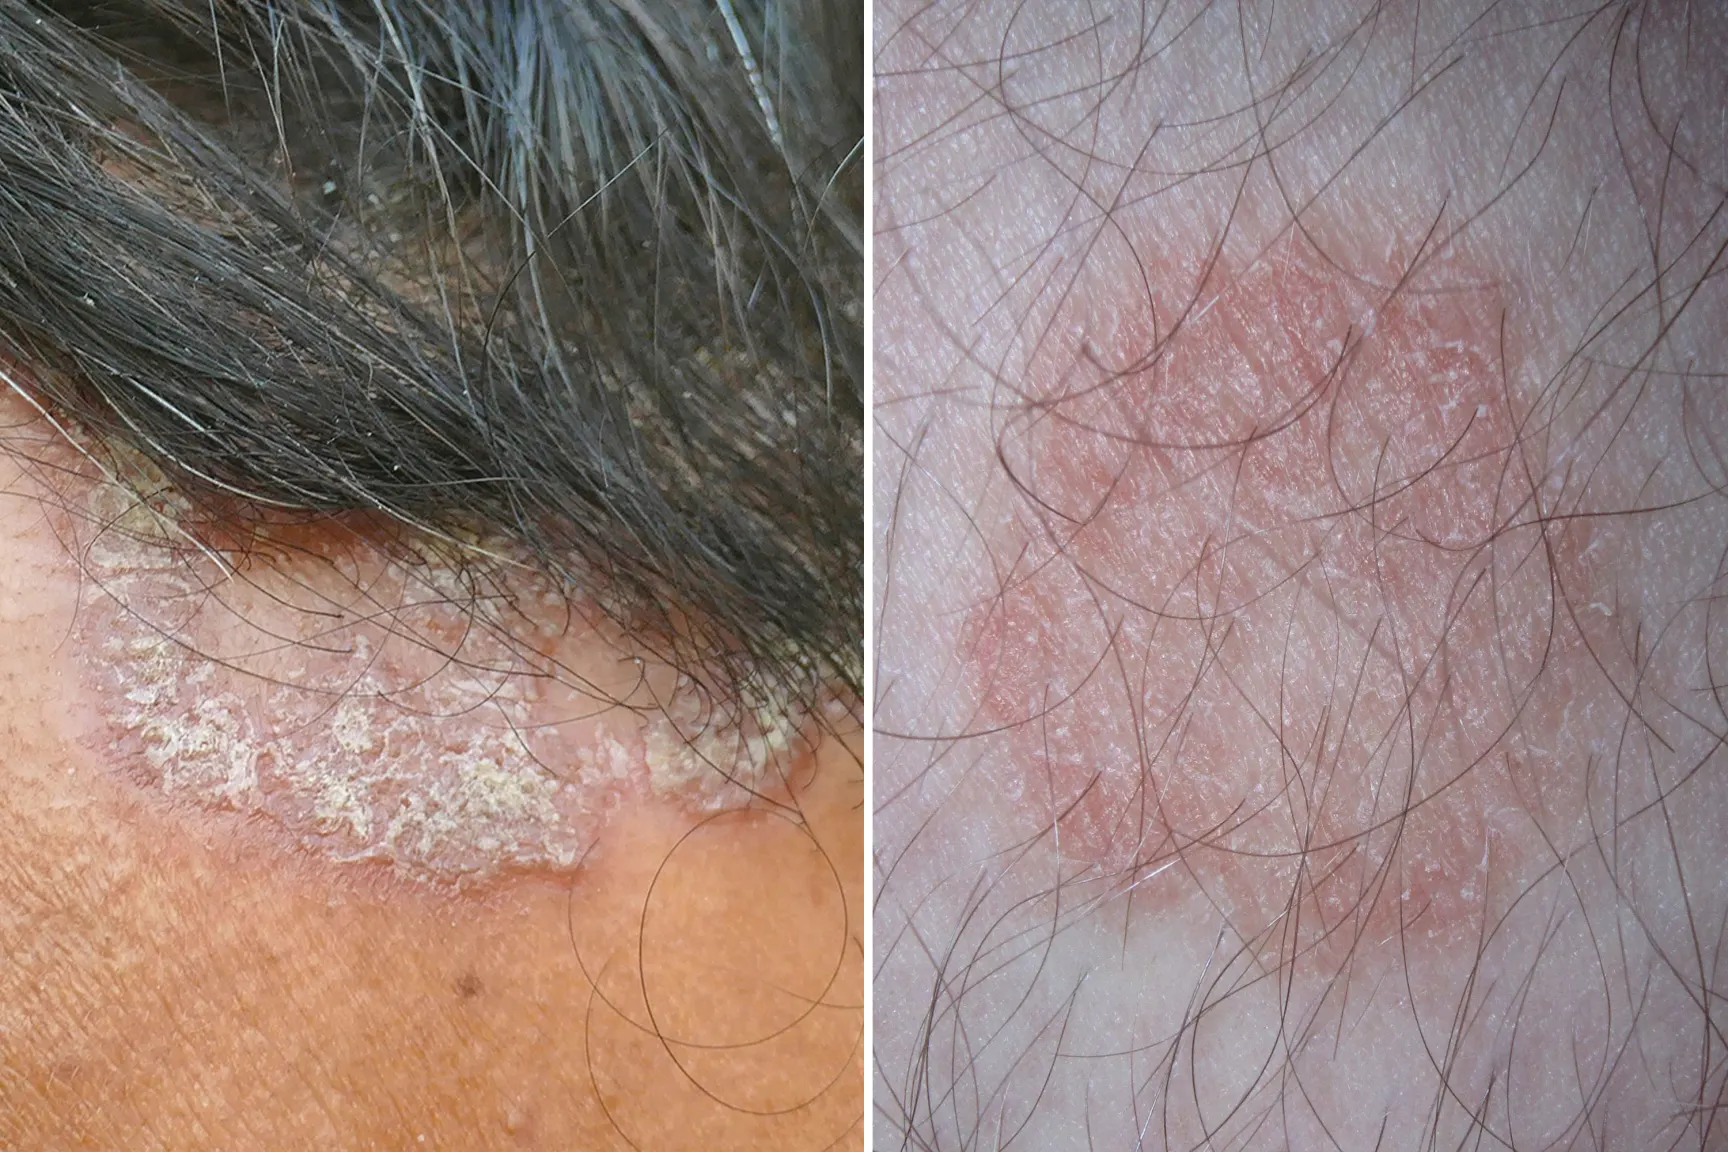 Two photos of scalp psoriasis (left), and a closeup of ringworm (right). GettyImages/anand purohit (left), Wikimedia Commons/James Heilman, MD, CC BY-SA 3.0 (right) 